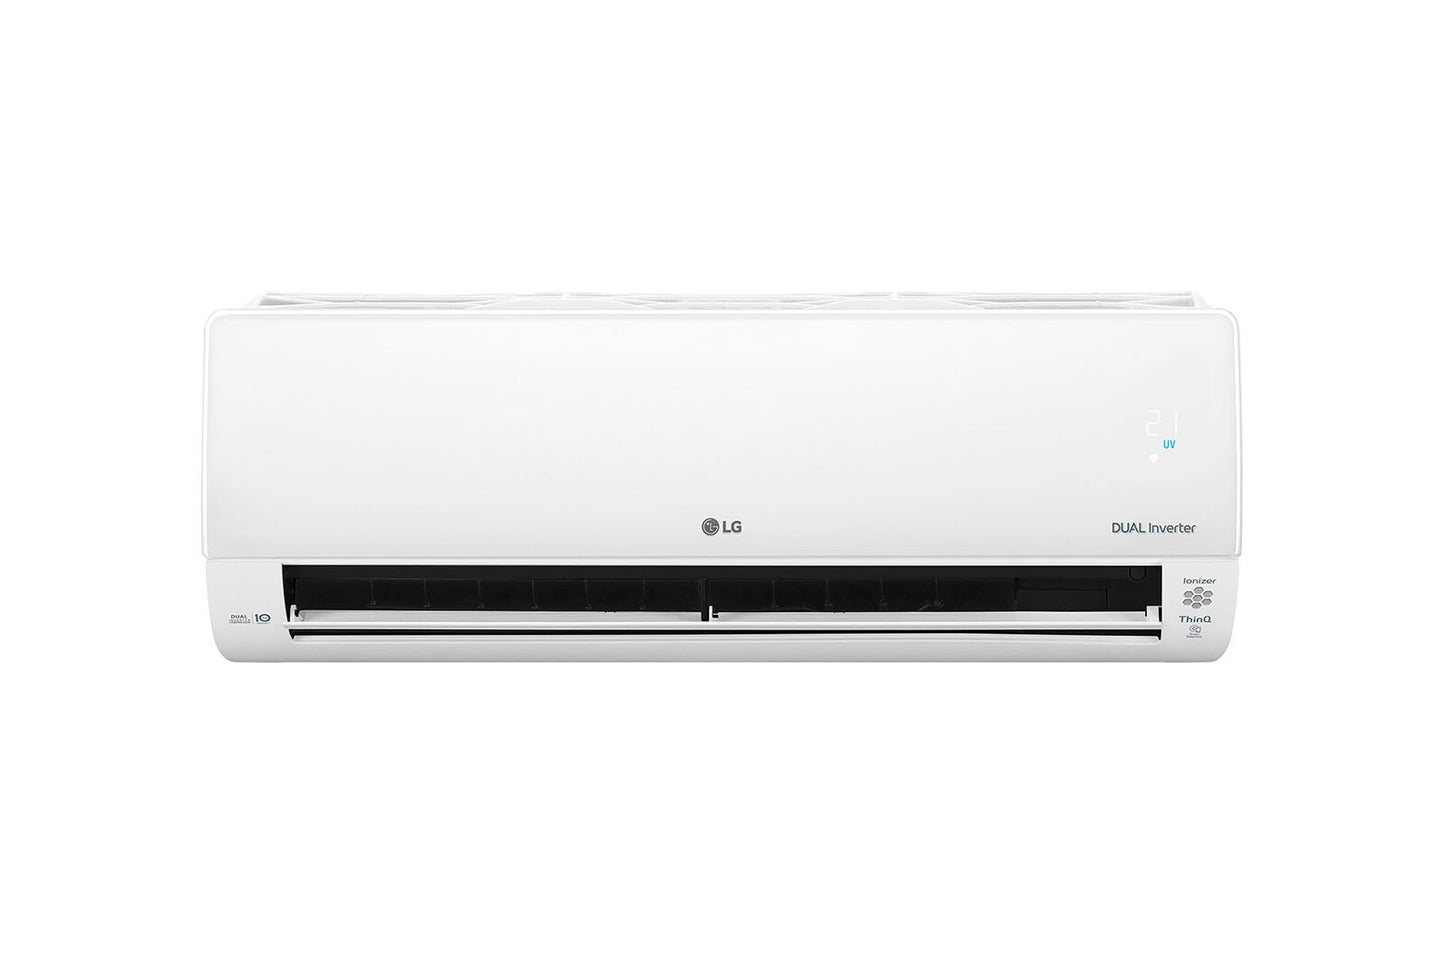 LG DELUXE Air Conditioner